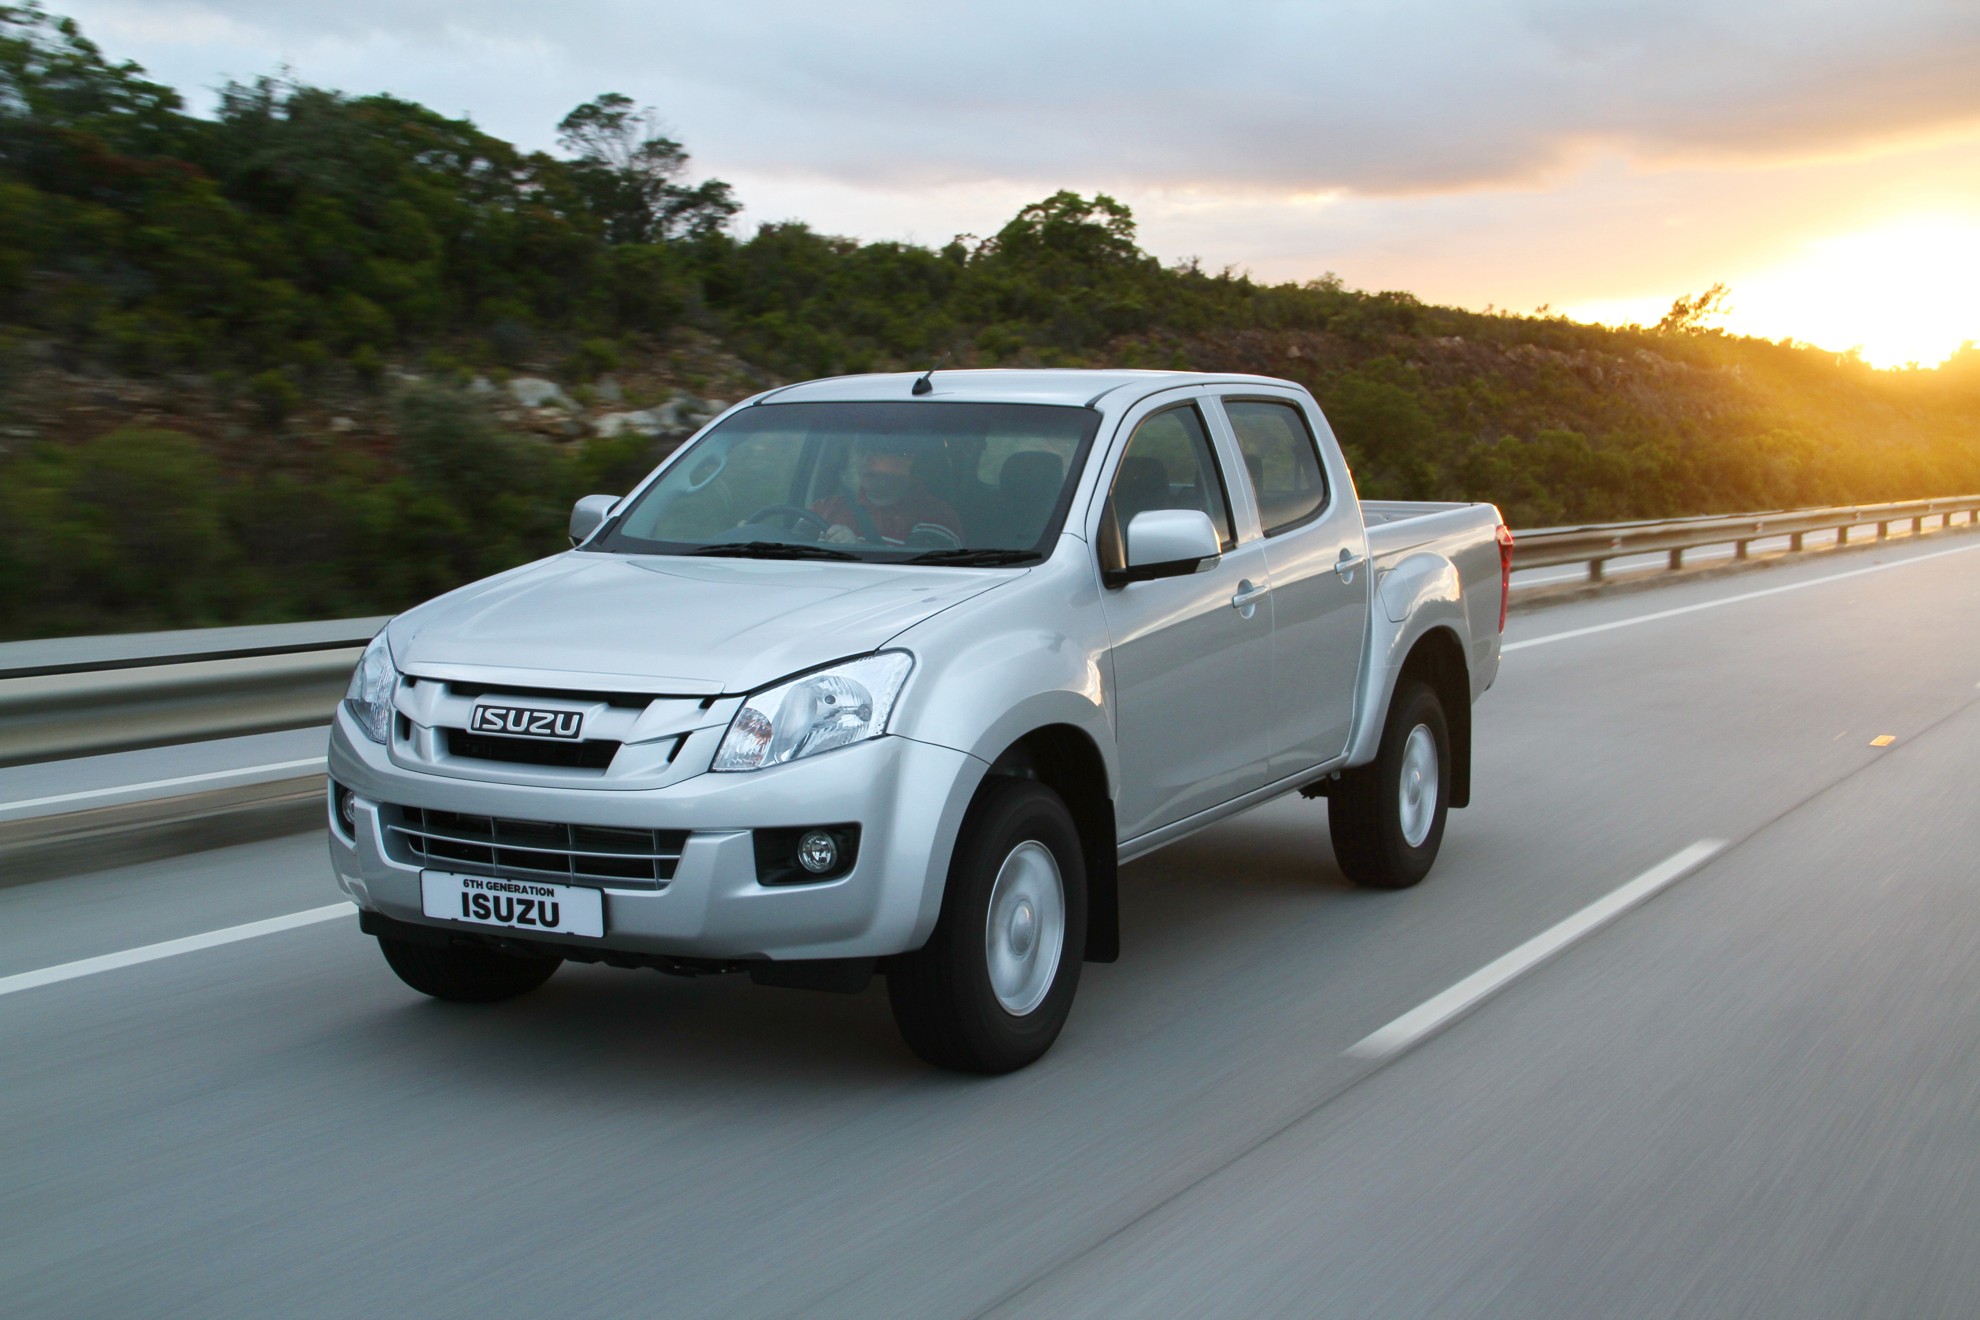 New Isuzu KB tailored locally for real tough South Africans